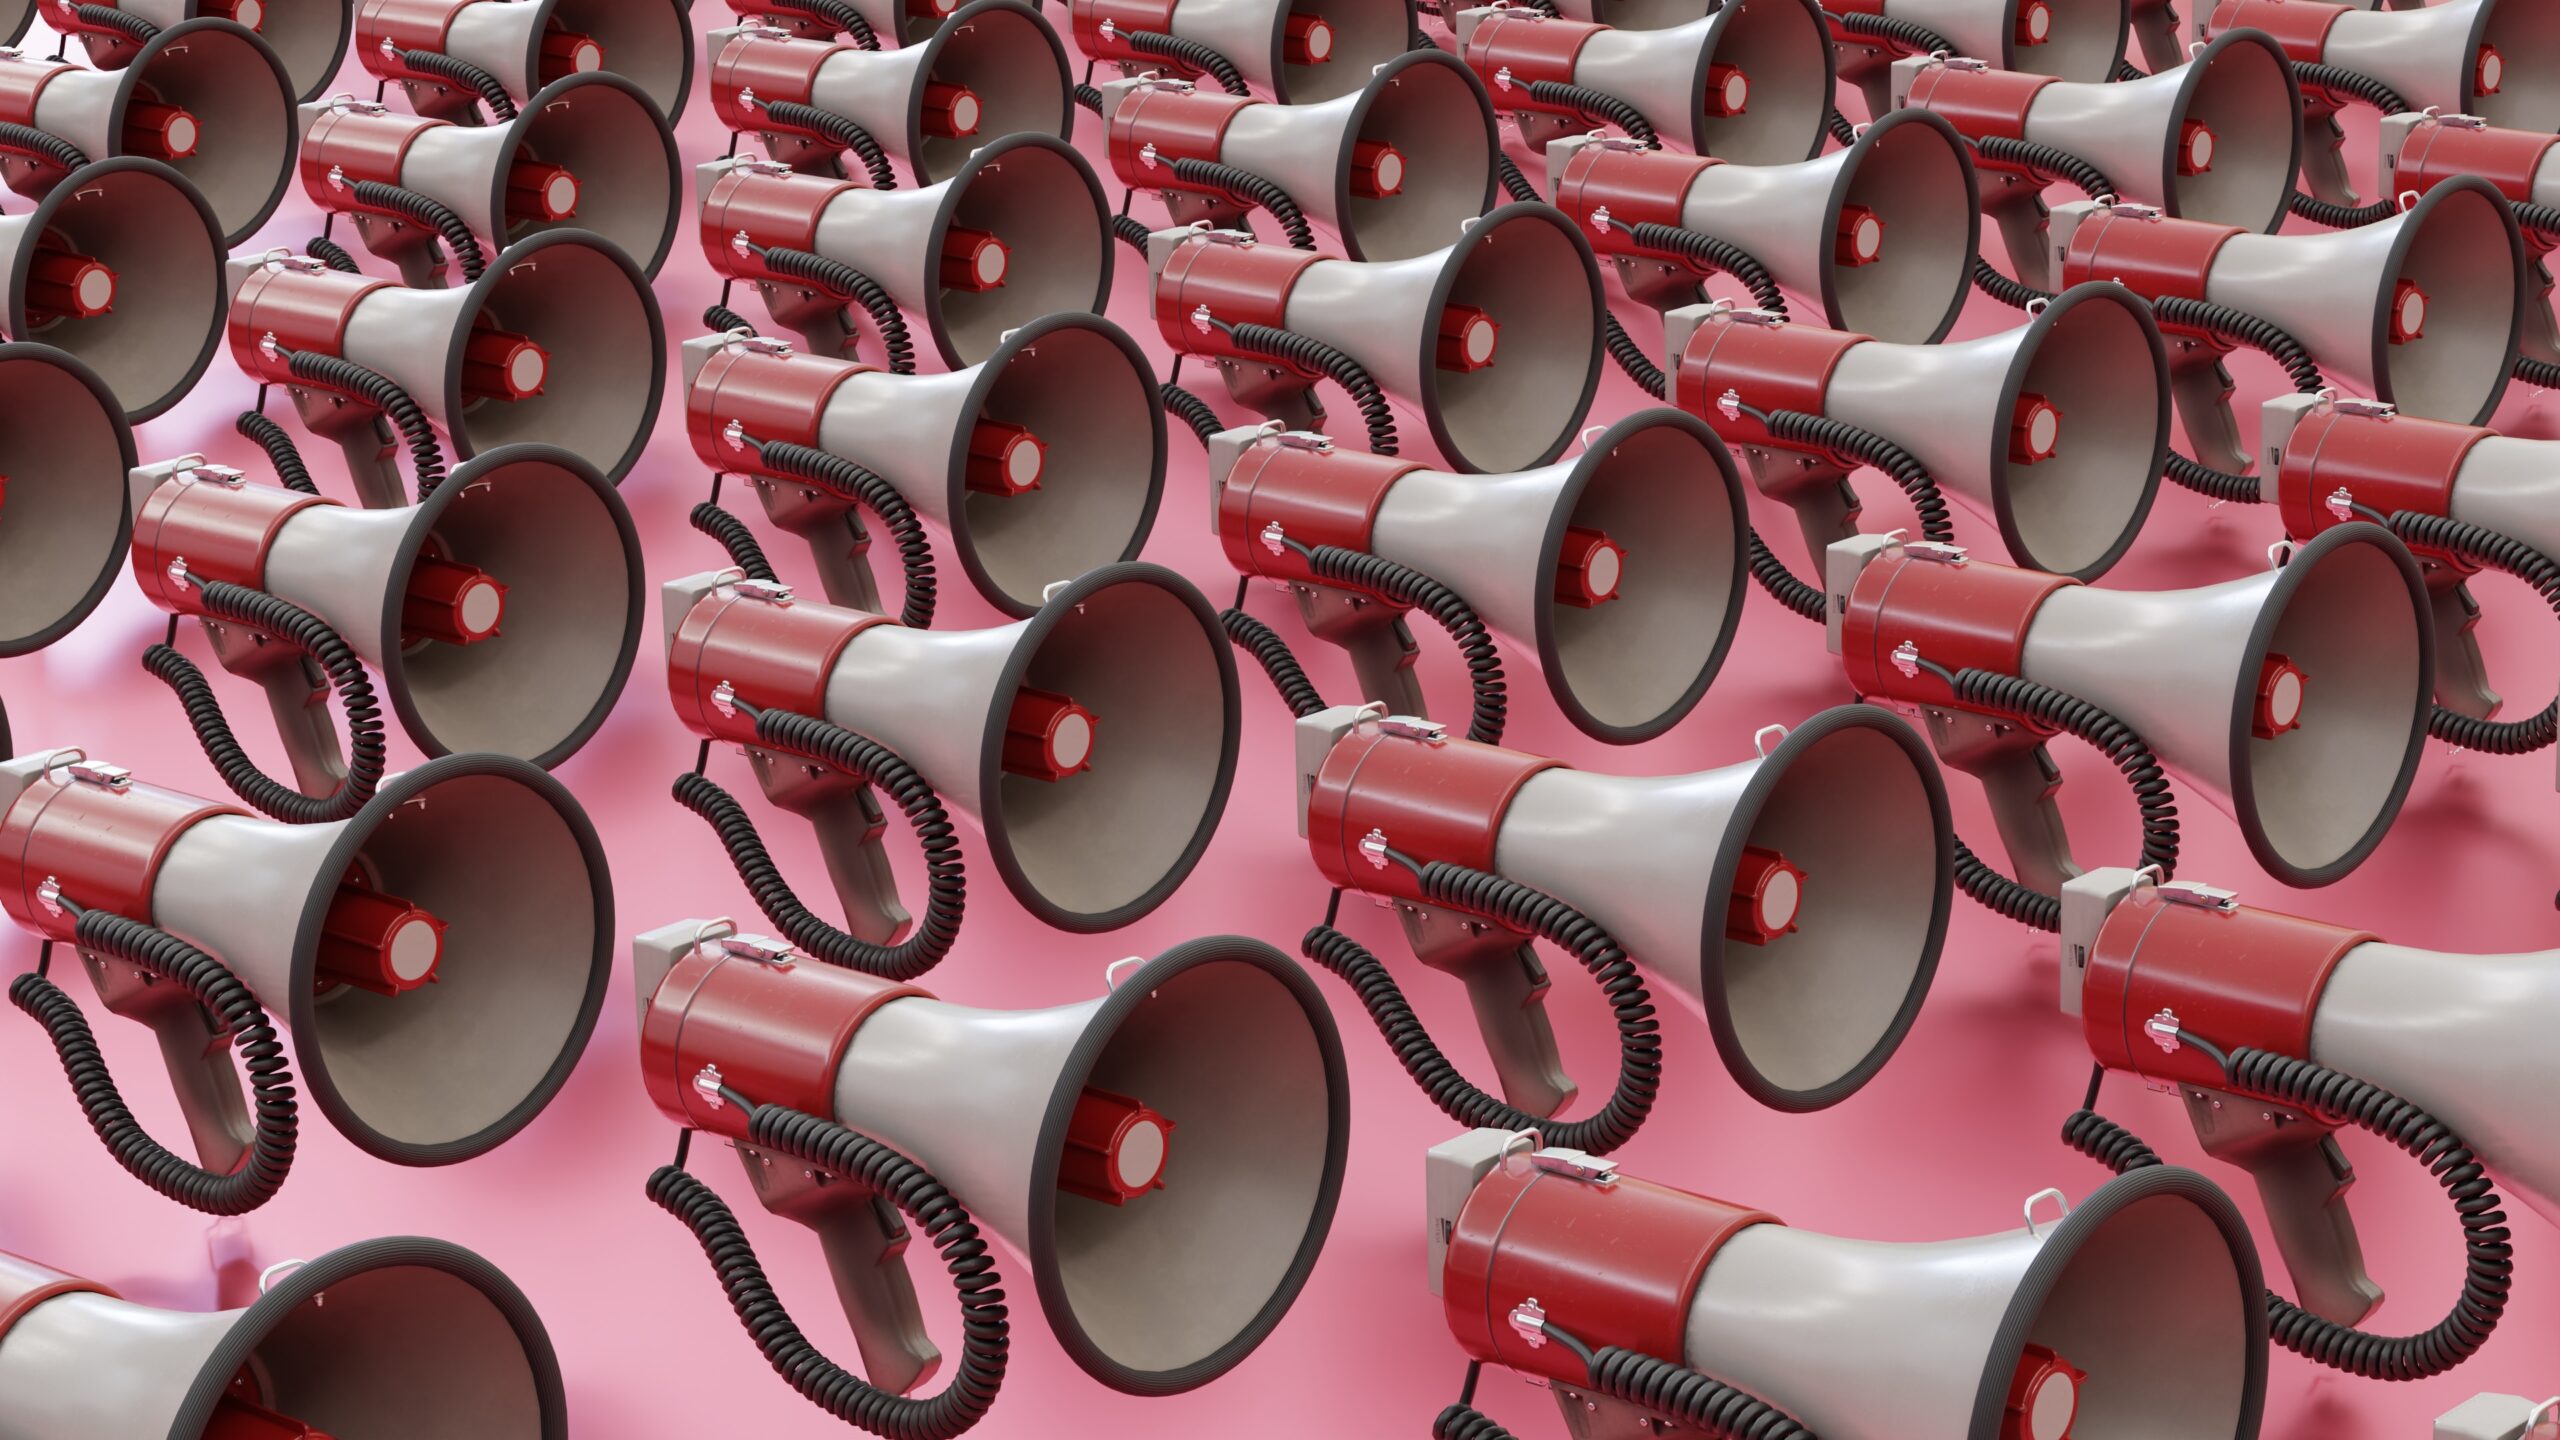 Tons of megaphones on a pink background